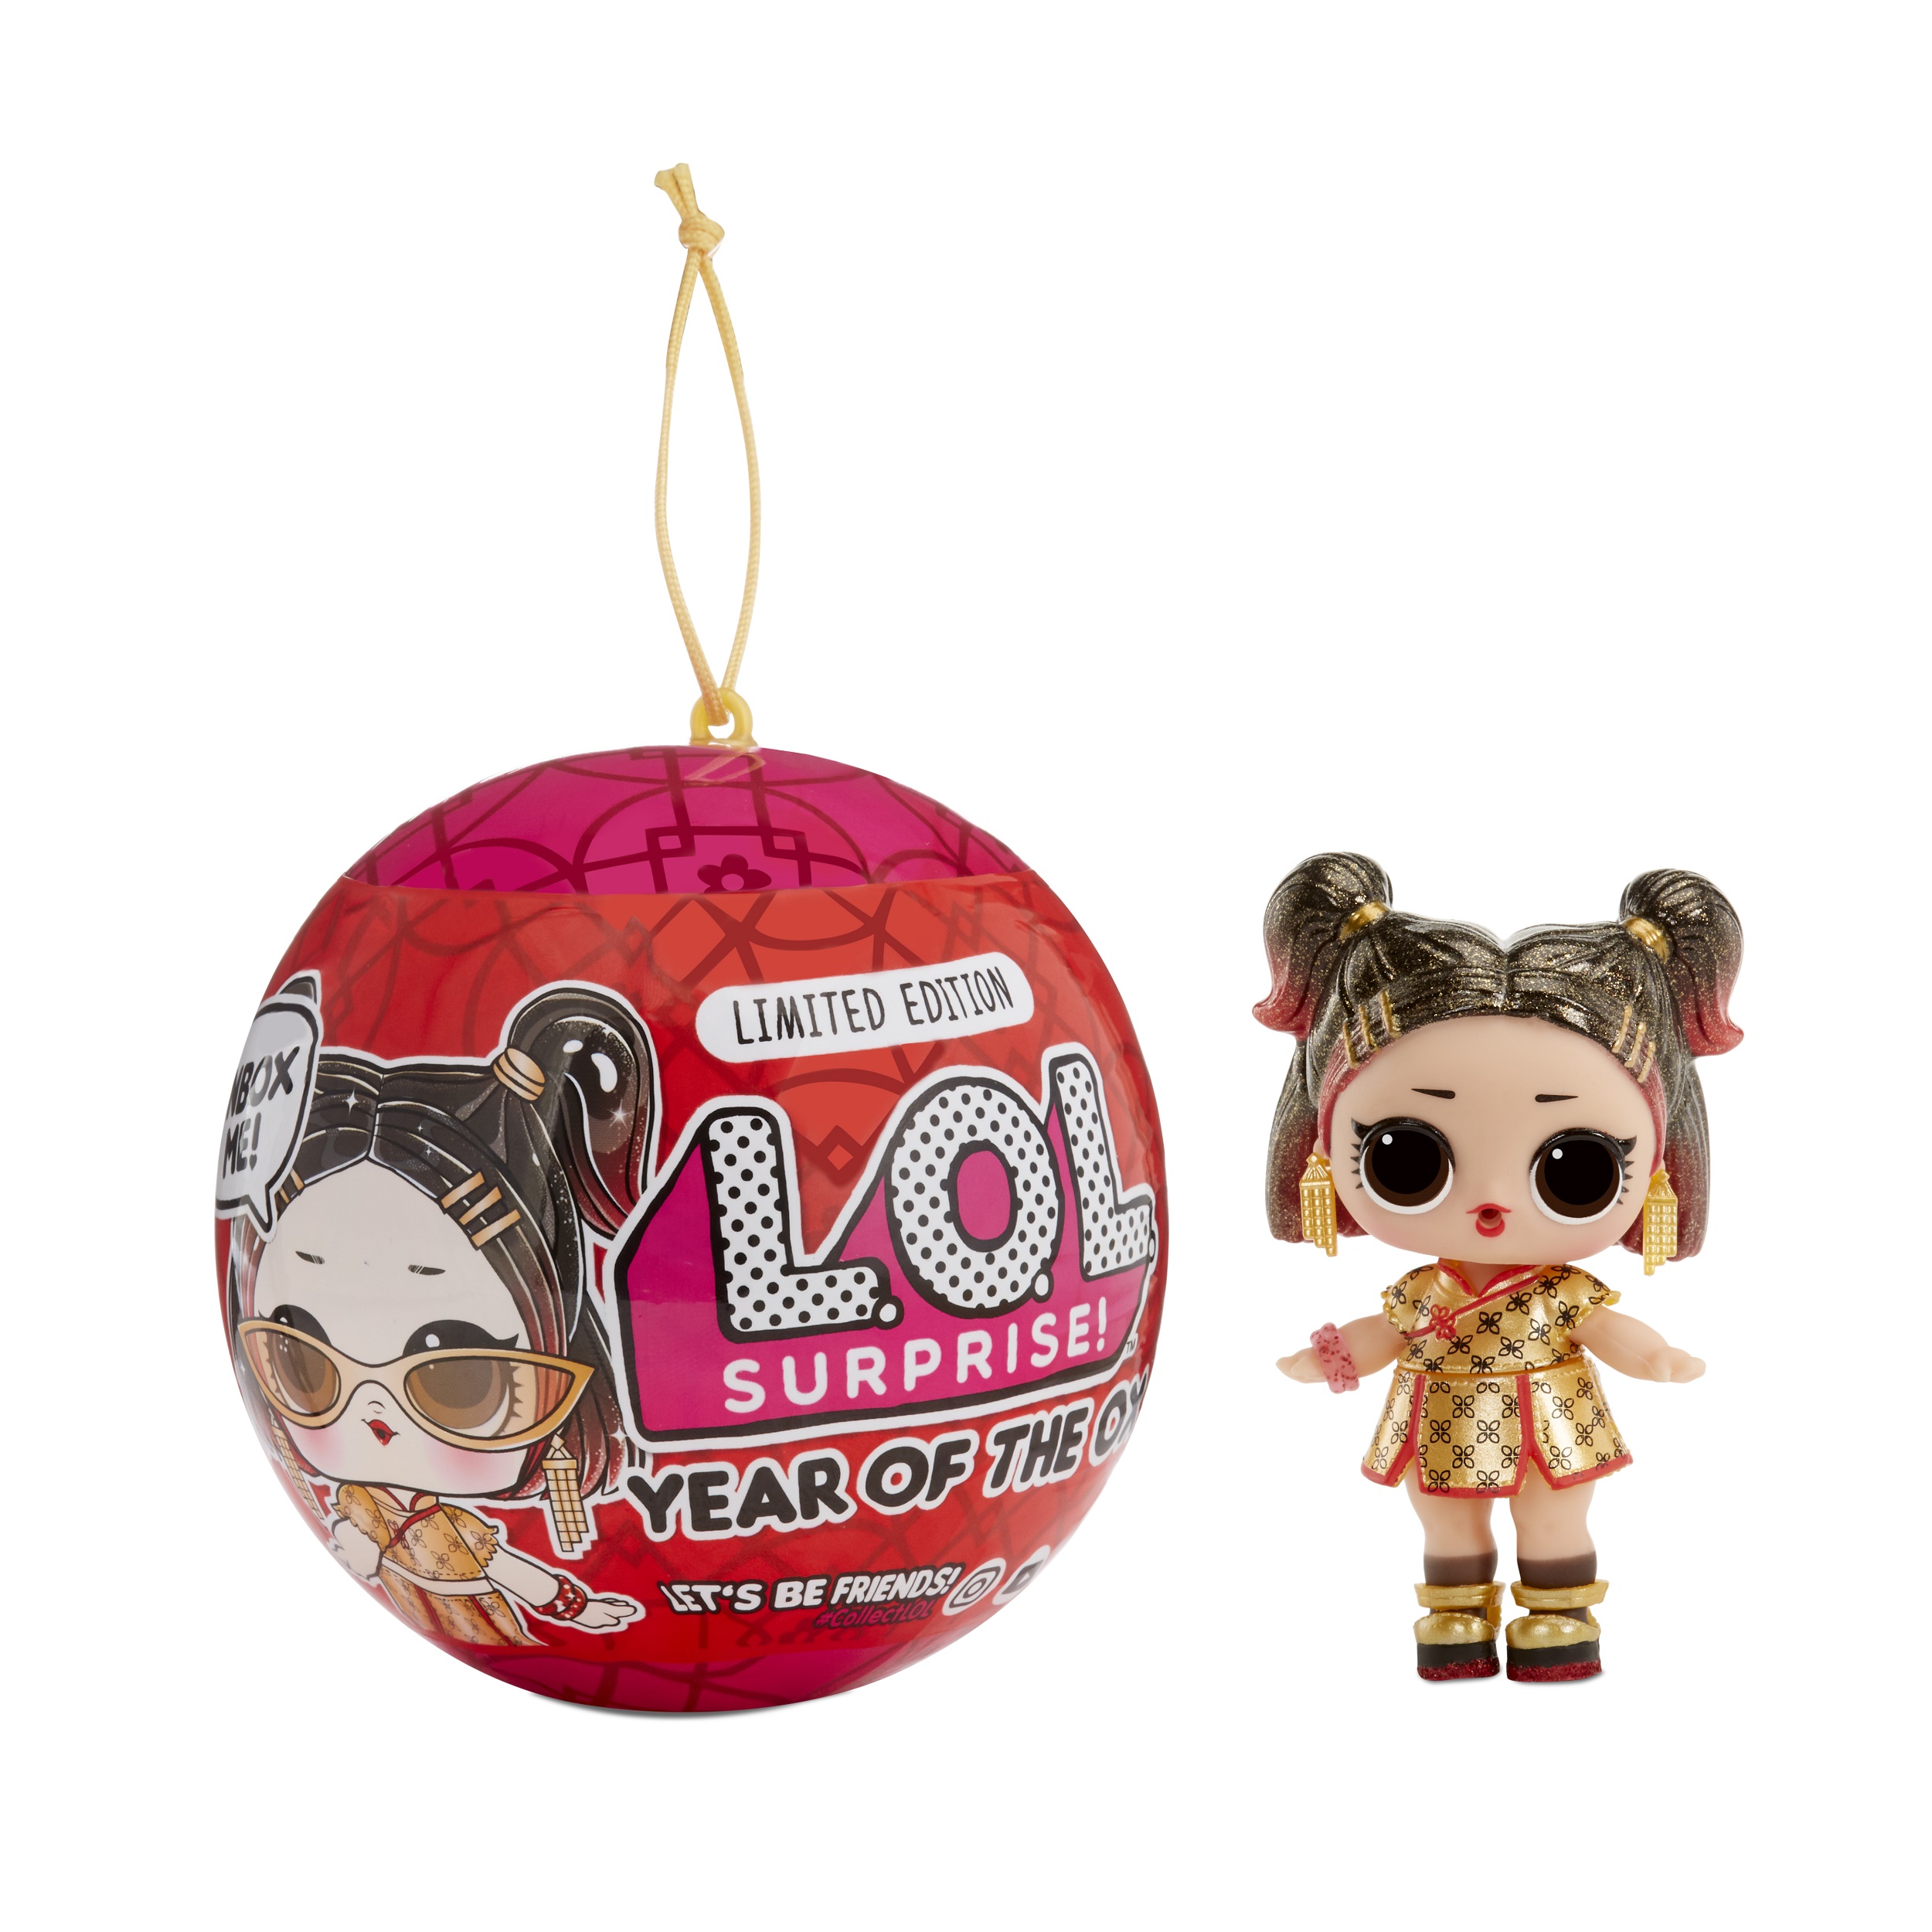 LOL Surprise Year Of The Ox Doll or Pet With 7 Surprises, Lunar New Year Doll or Pet, Accessories. - image 2 of 5